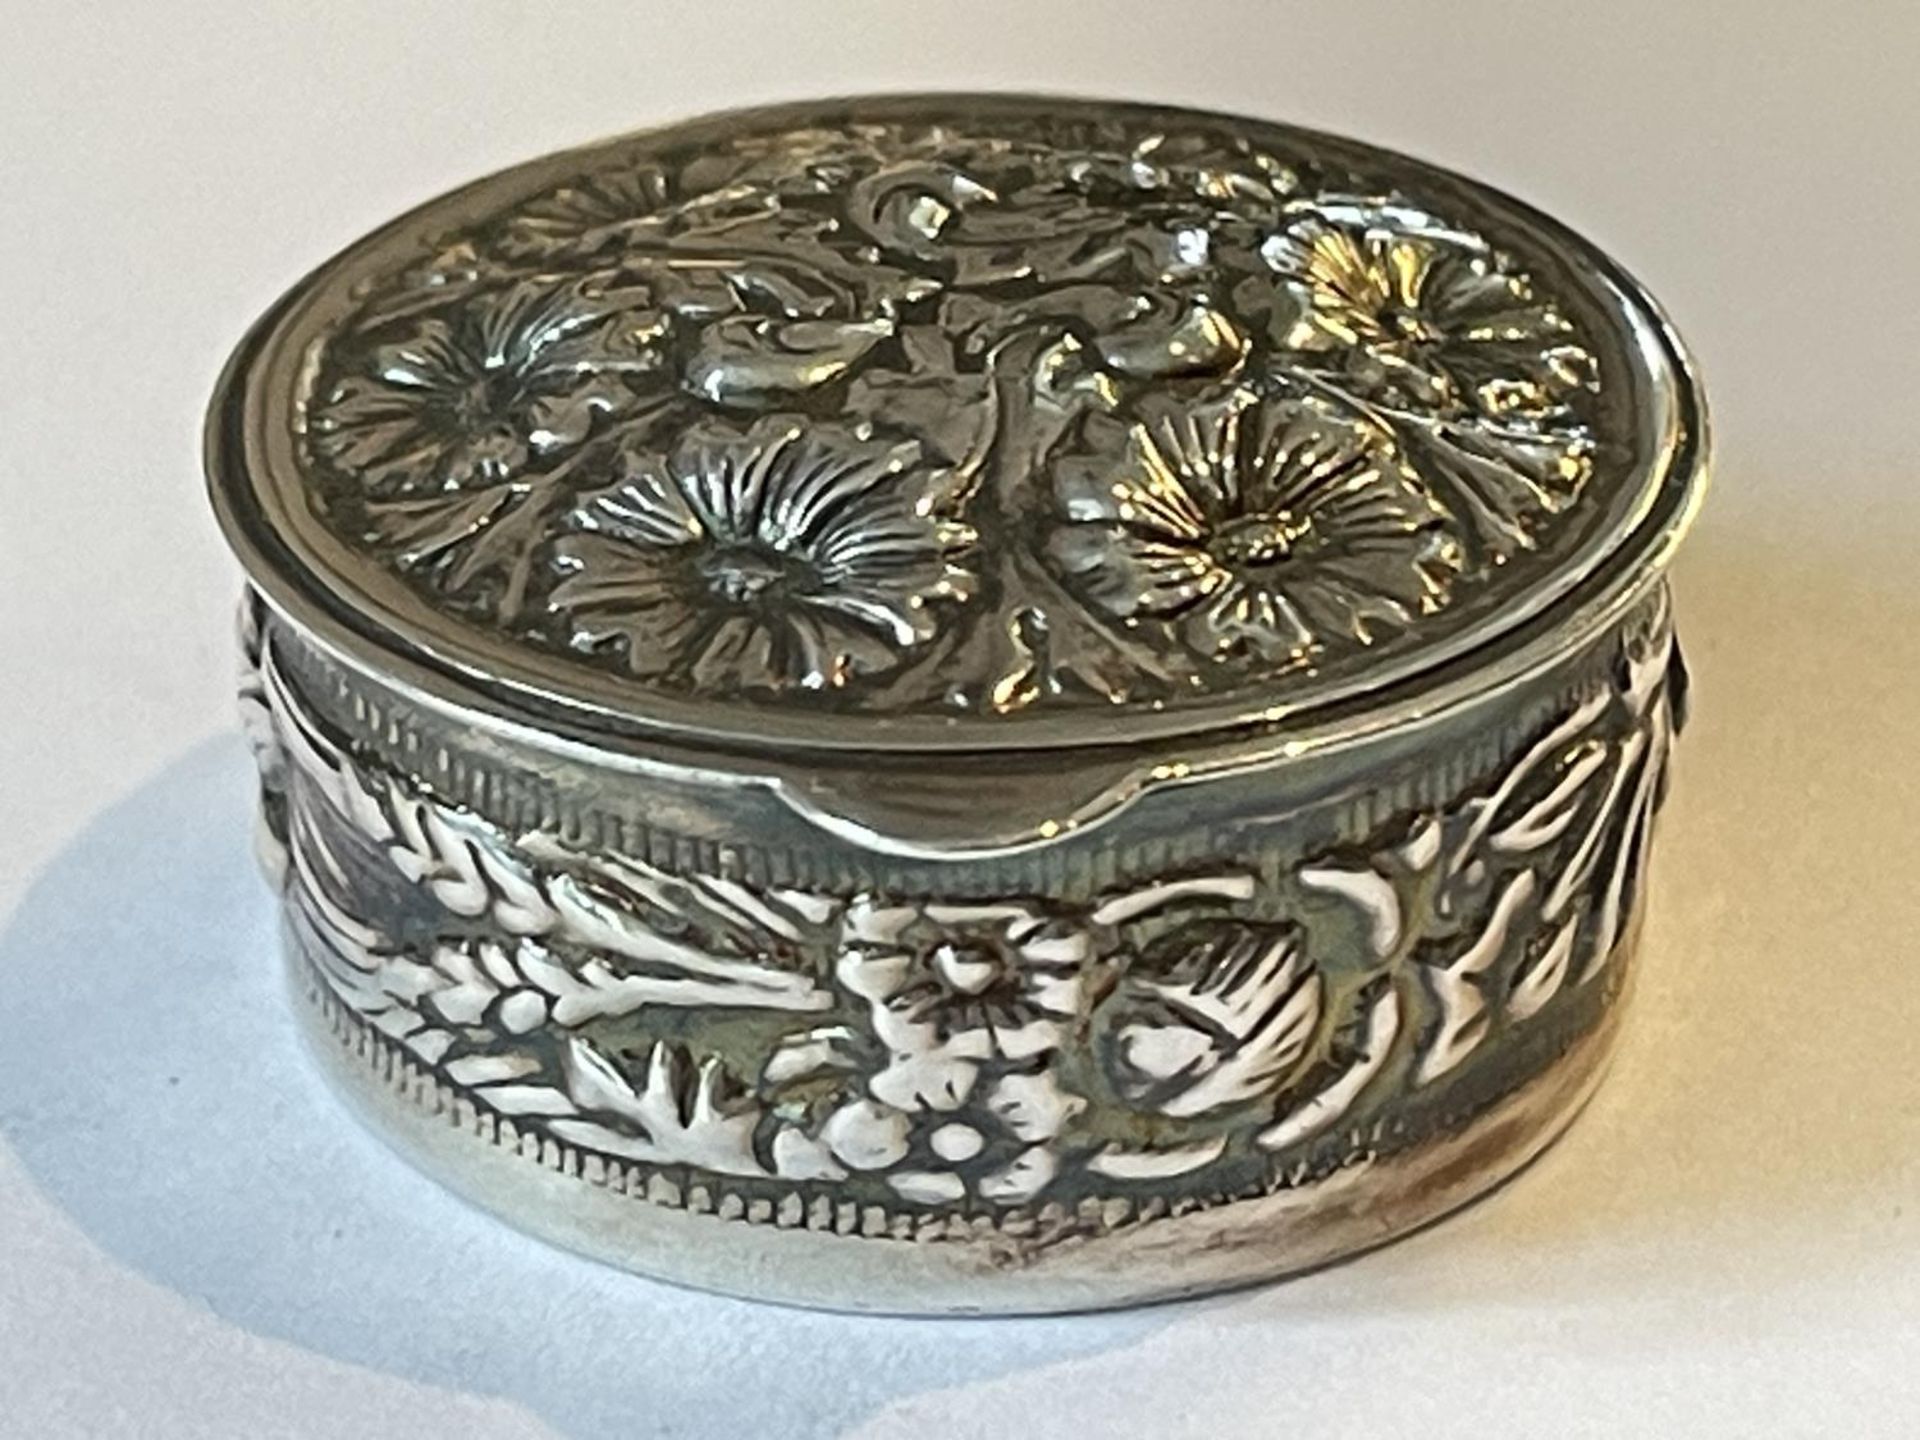 A SILVER CIRCULAR PILL BOX WITH FLORAL DECORATION - Image 2 of 4